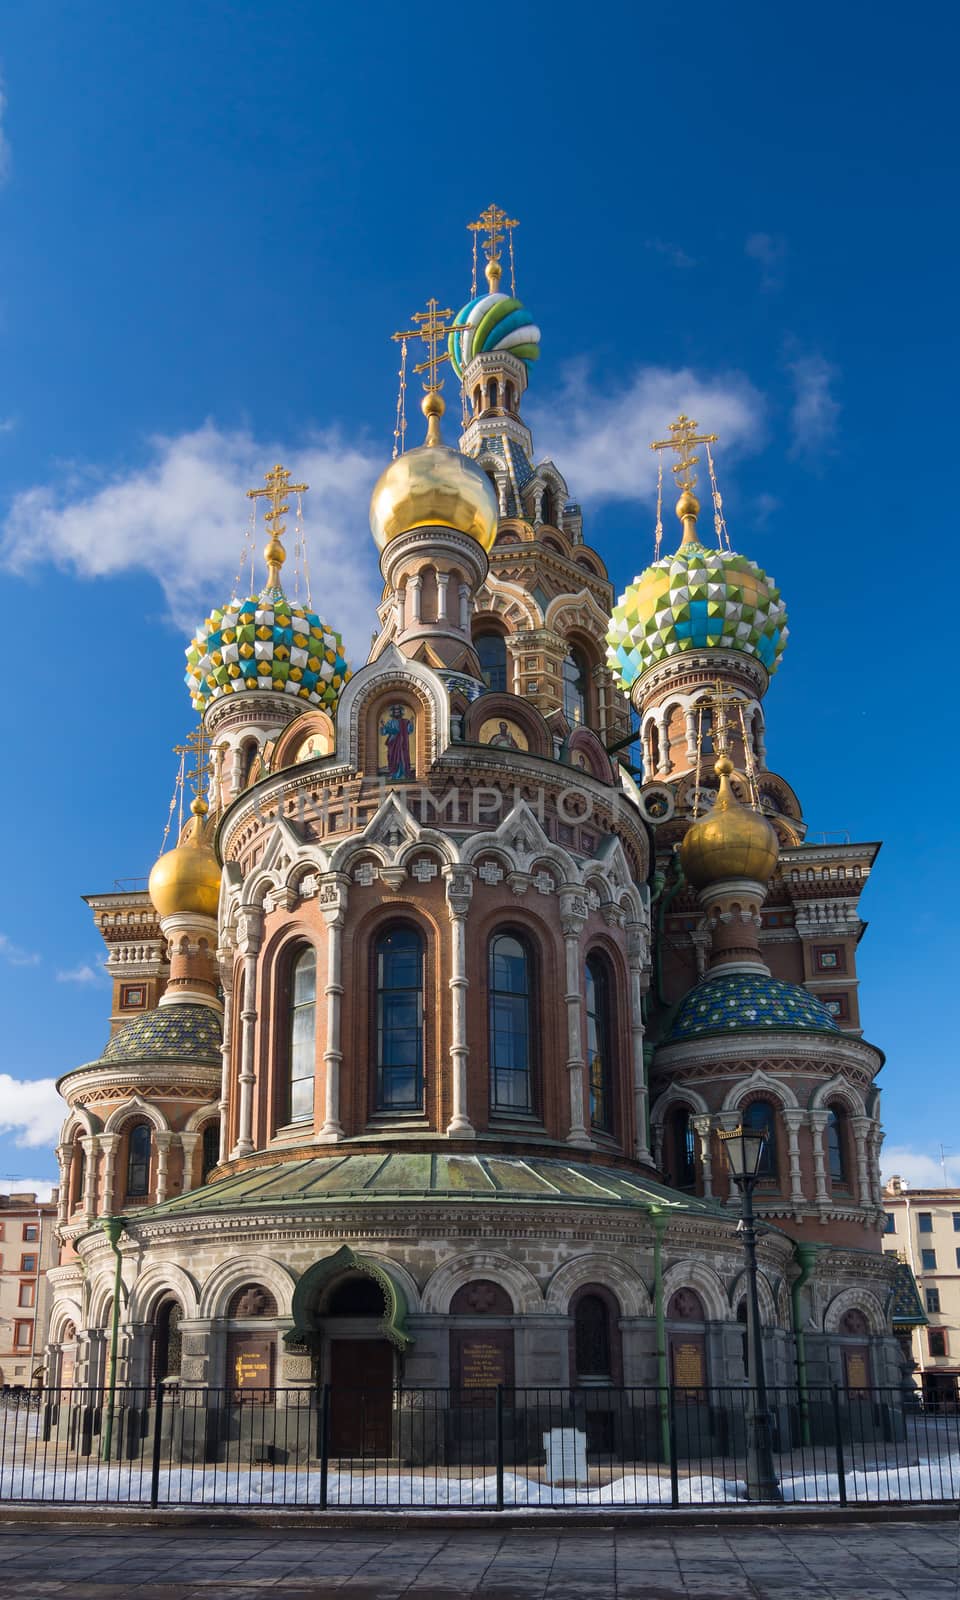 Famous Church of the Savior on Blood in St. Petersburg